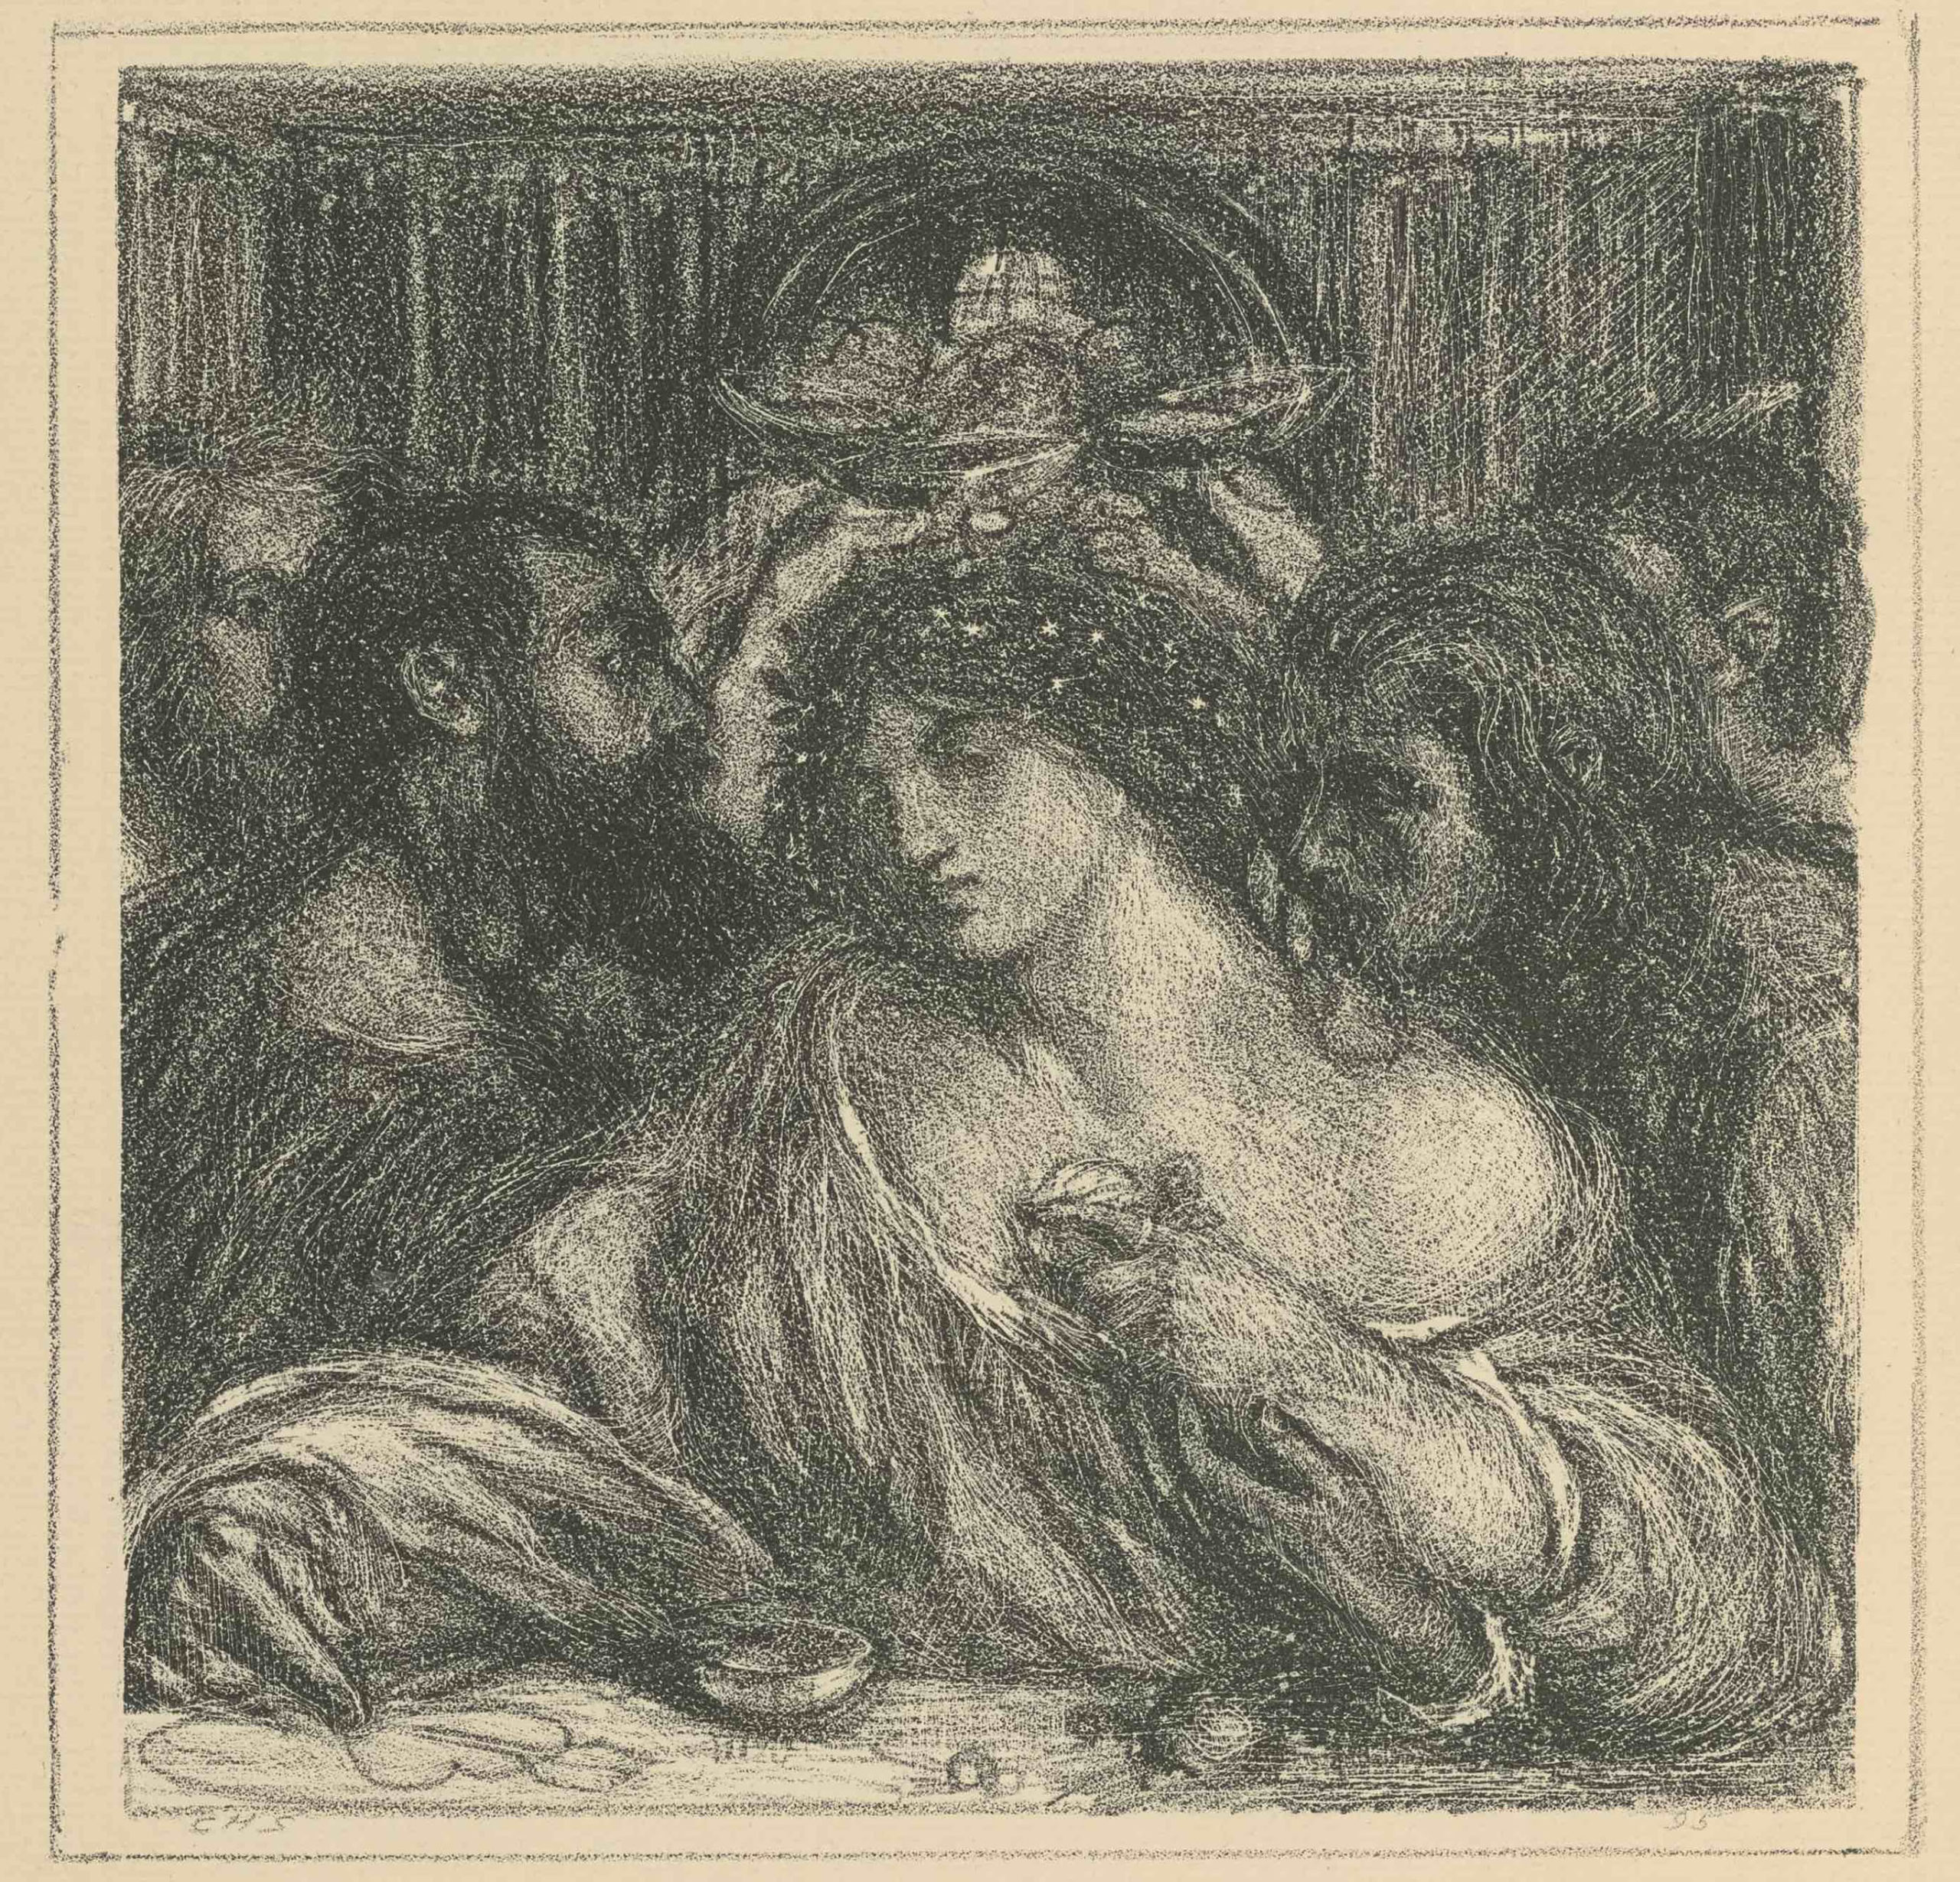 The square lithographic image is framed within a thinly-lined double border, rendered
      in tones of black. 
      The image is an illustration of Delia, from the poems of Tibullus. In the foreground,
      Delia is seated at 
      a table eating, facing the viewer. She wears a ring on the index finger of her left
      hand, which holds a 
      fruit up to her chest. With her right hand she draws a heart with an arrow through
      it on the table. She 
      wears white flowers in her hair. Her loose-fitting robes fall off of her left shoulder,
      where a man, Albius 
      Tiuillus, leans in profile to kiss the nape of her neck. Three men in the background
      crowd the frame on either 
      side, each lifting cups to toast each other in the upper centre of the frame. In the
      background a rounded 
      doorway is shown on the far wall, around the dark walls of the room are visible.